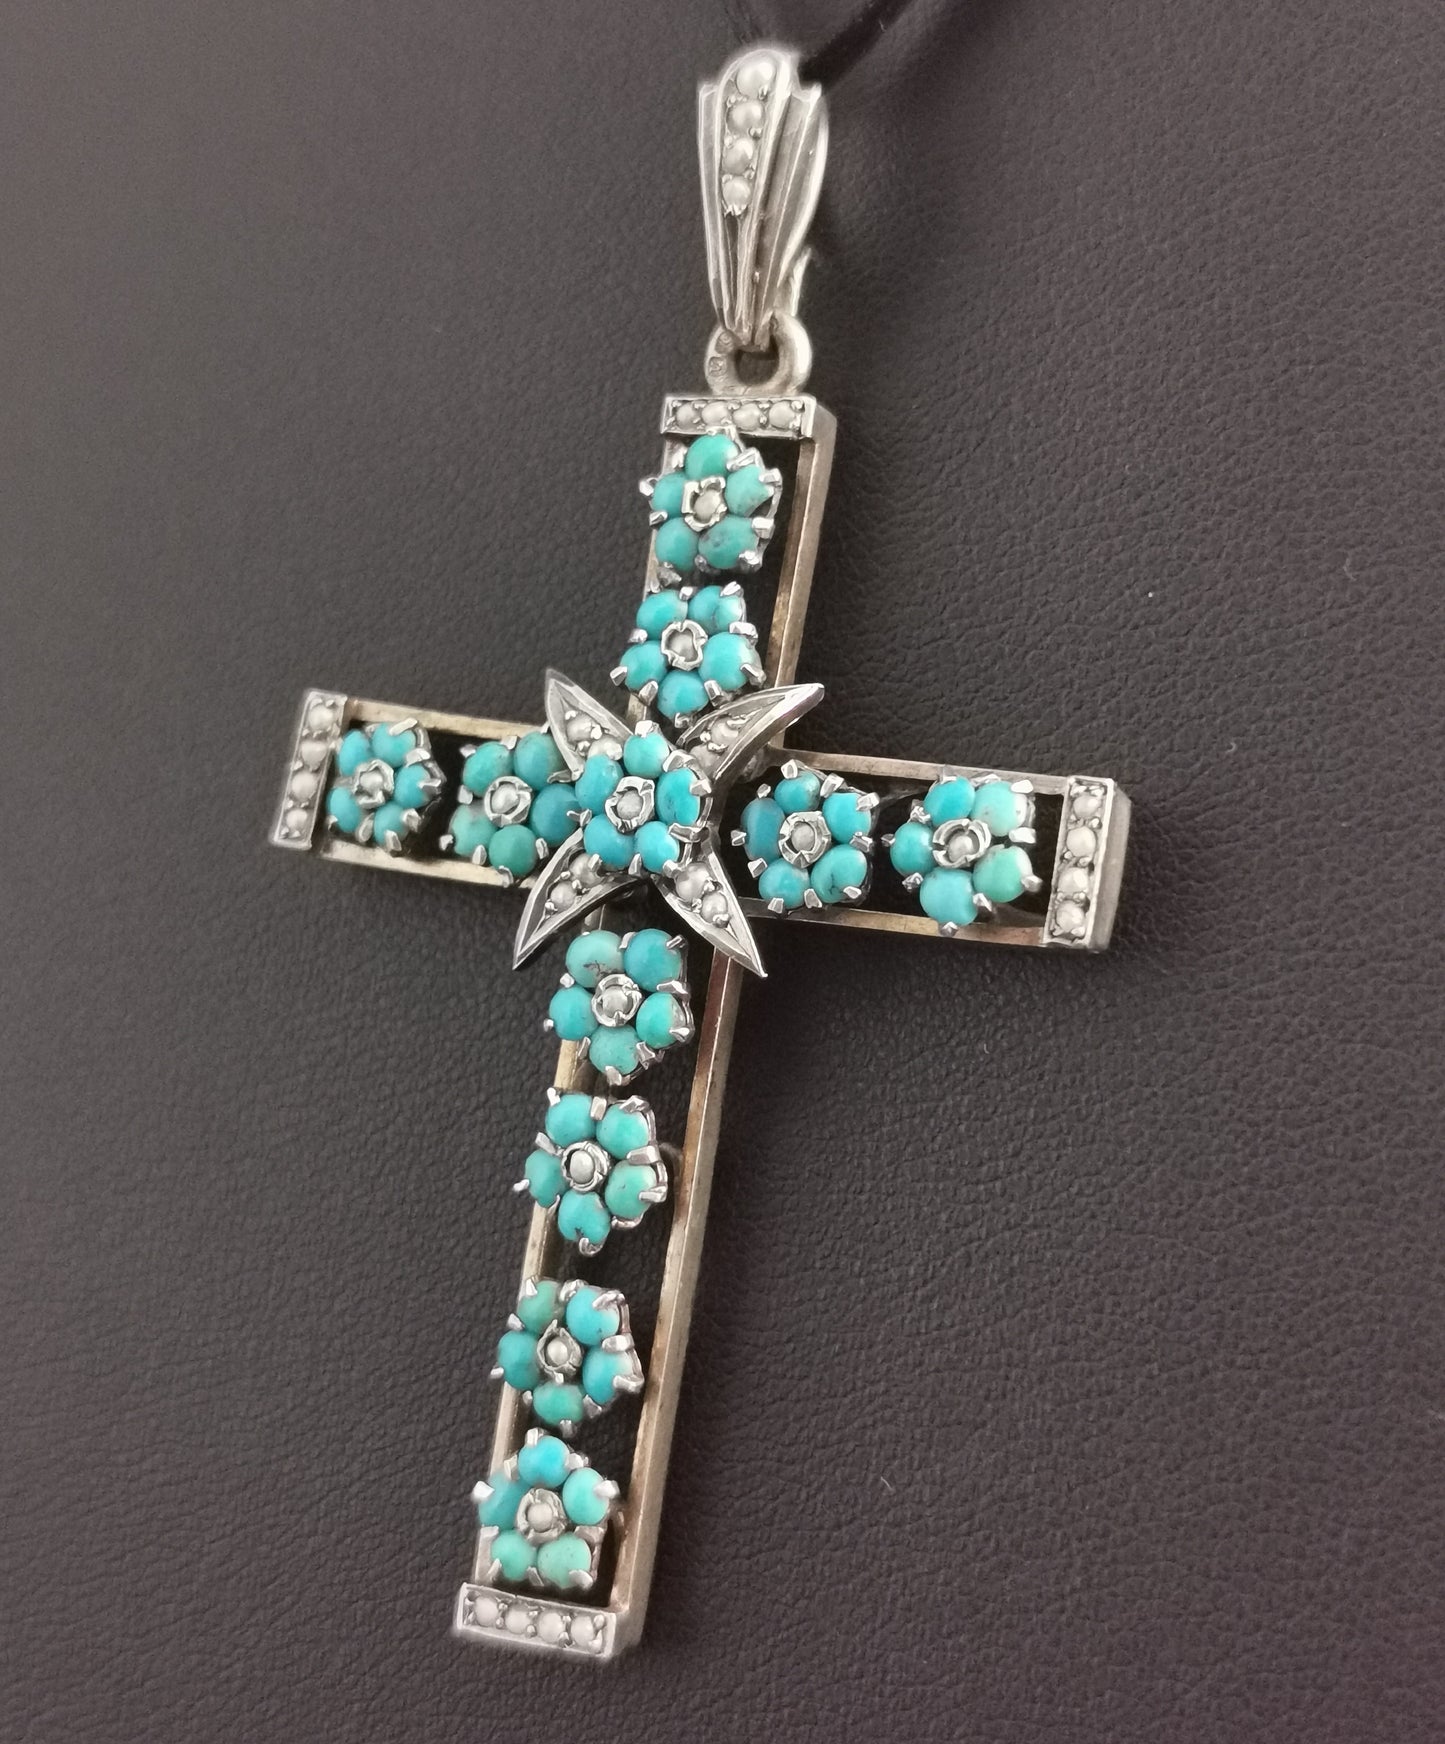 Antique Austro Hungarian Cross pendant, Turquoise, Silver and seed pearl